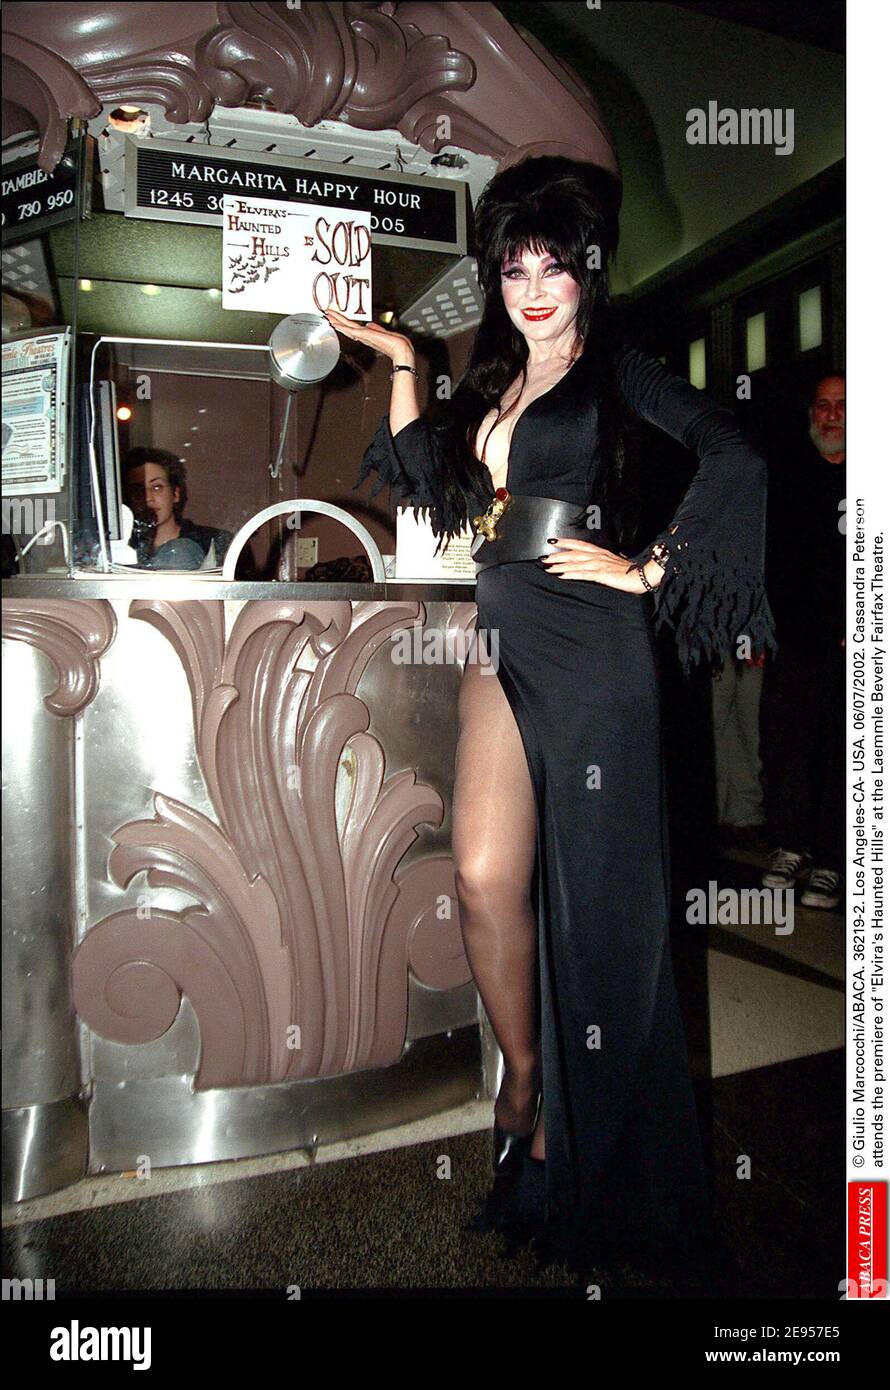 © Giulio Marcocchi/ABACA. 36219-2. Los Angeles-CA- USA. 06/07/2002. Cassandra Peterson attends the premiere of Elvira's Haunted Hills at the Laemmle Beverly Fairfax Theatre. Stock Photo